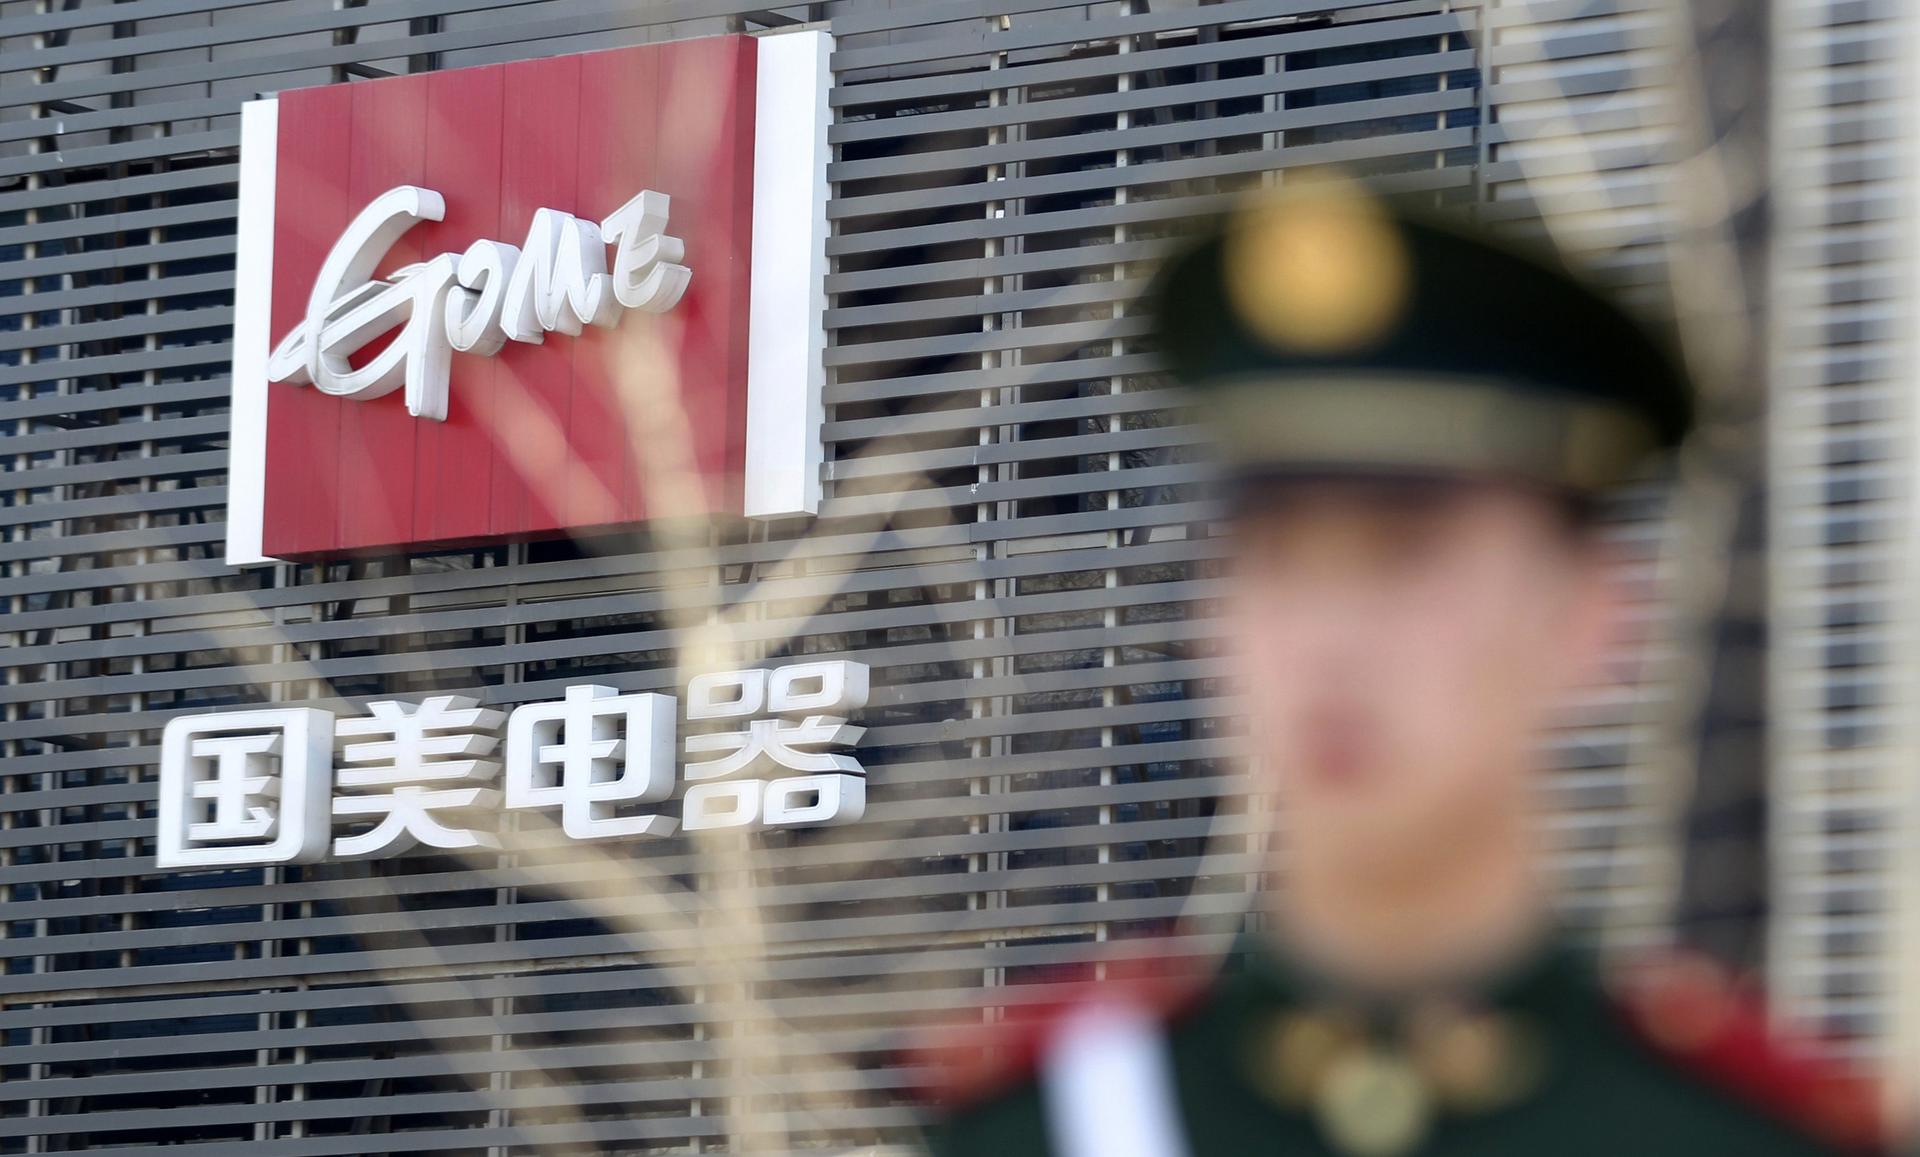 Gome Electrical Appliance is opening more shops and is looking to boost internet sales through its alliance with Alibaba. Photo: Reuters